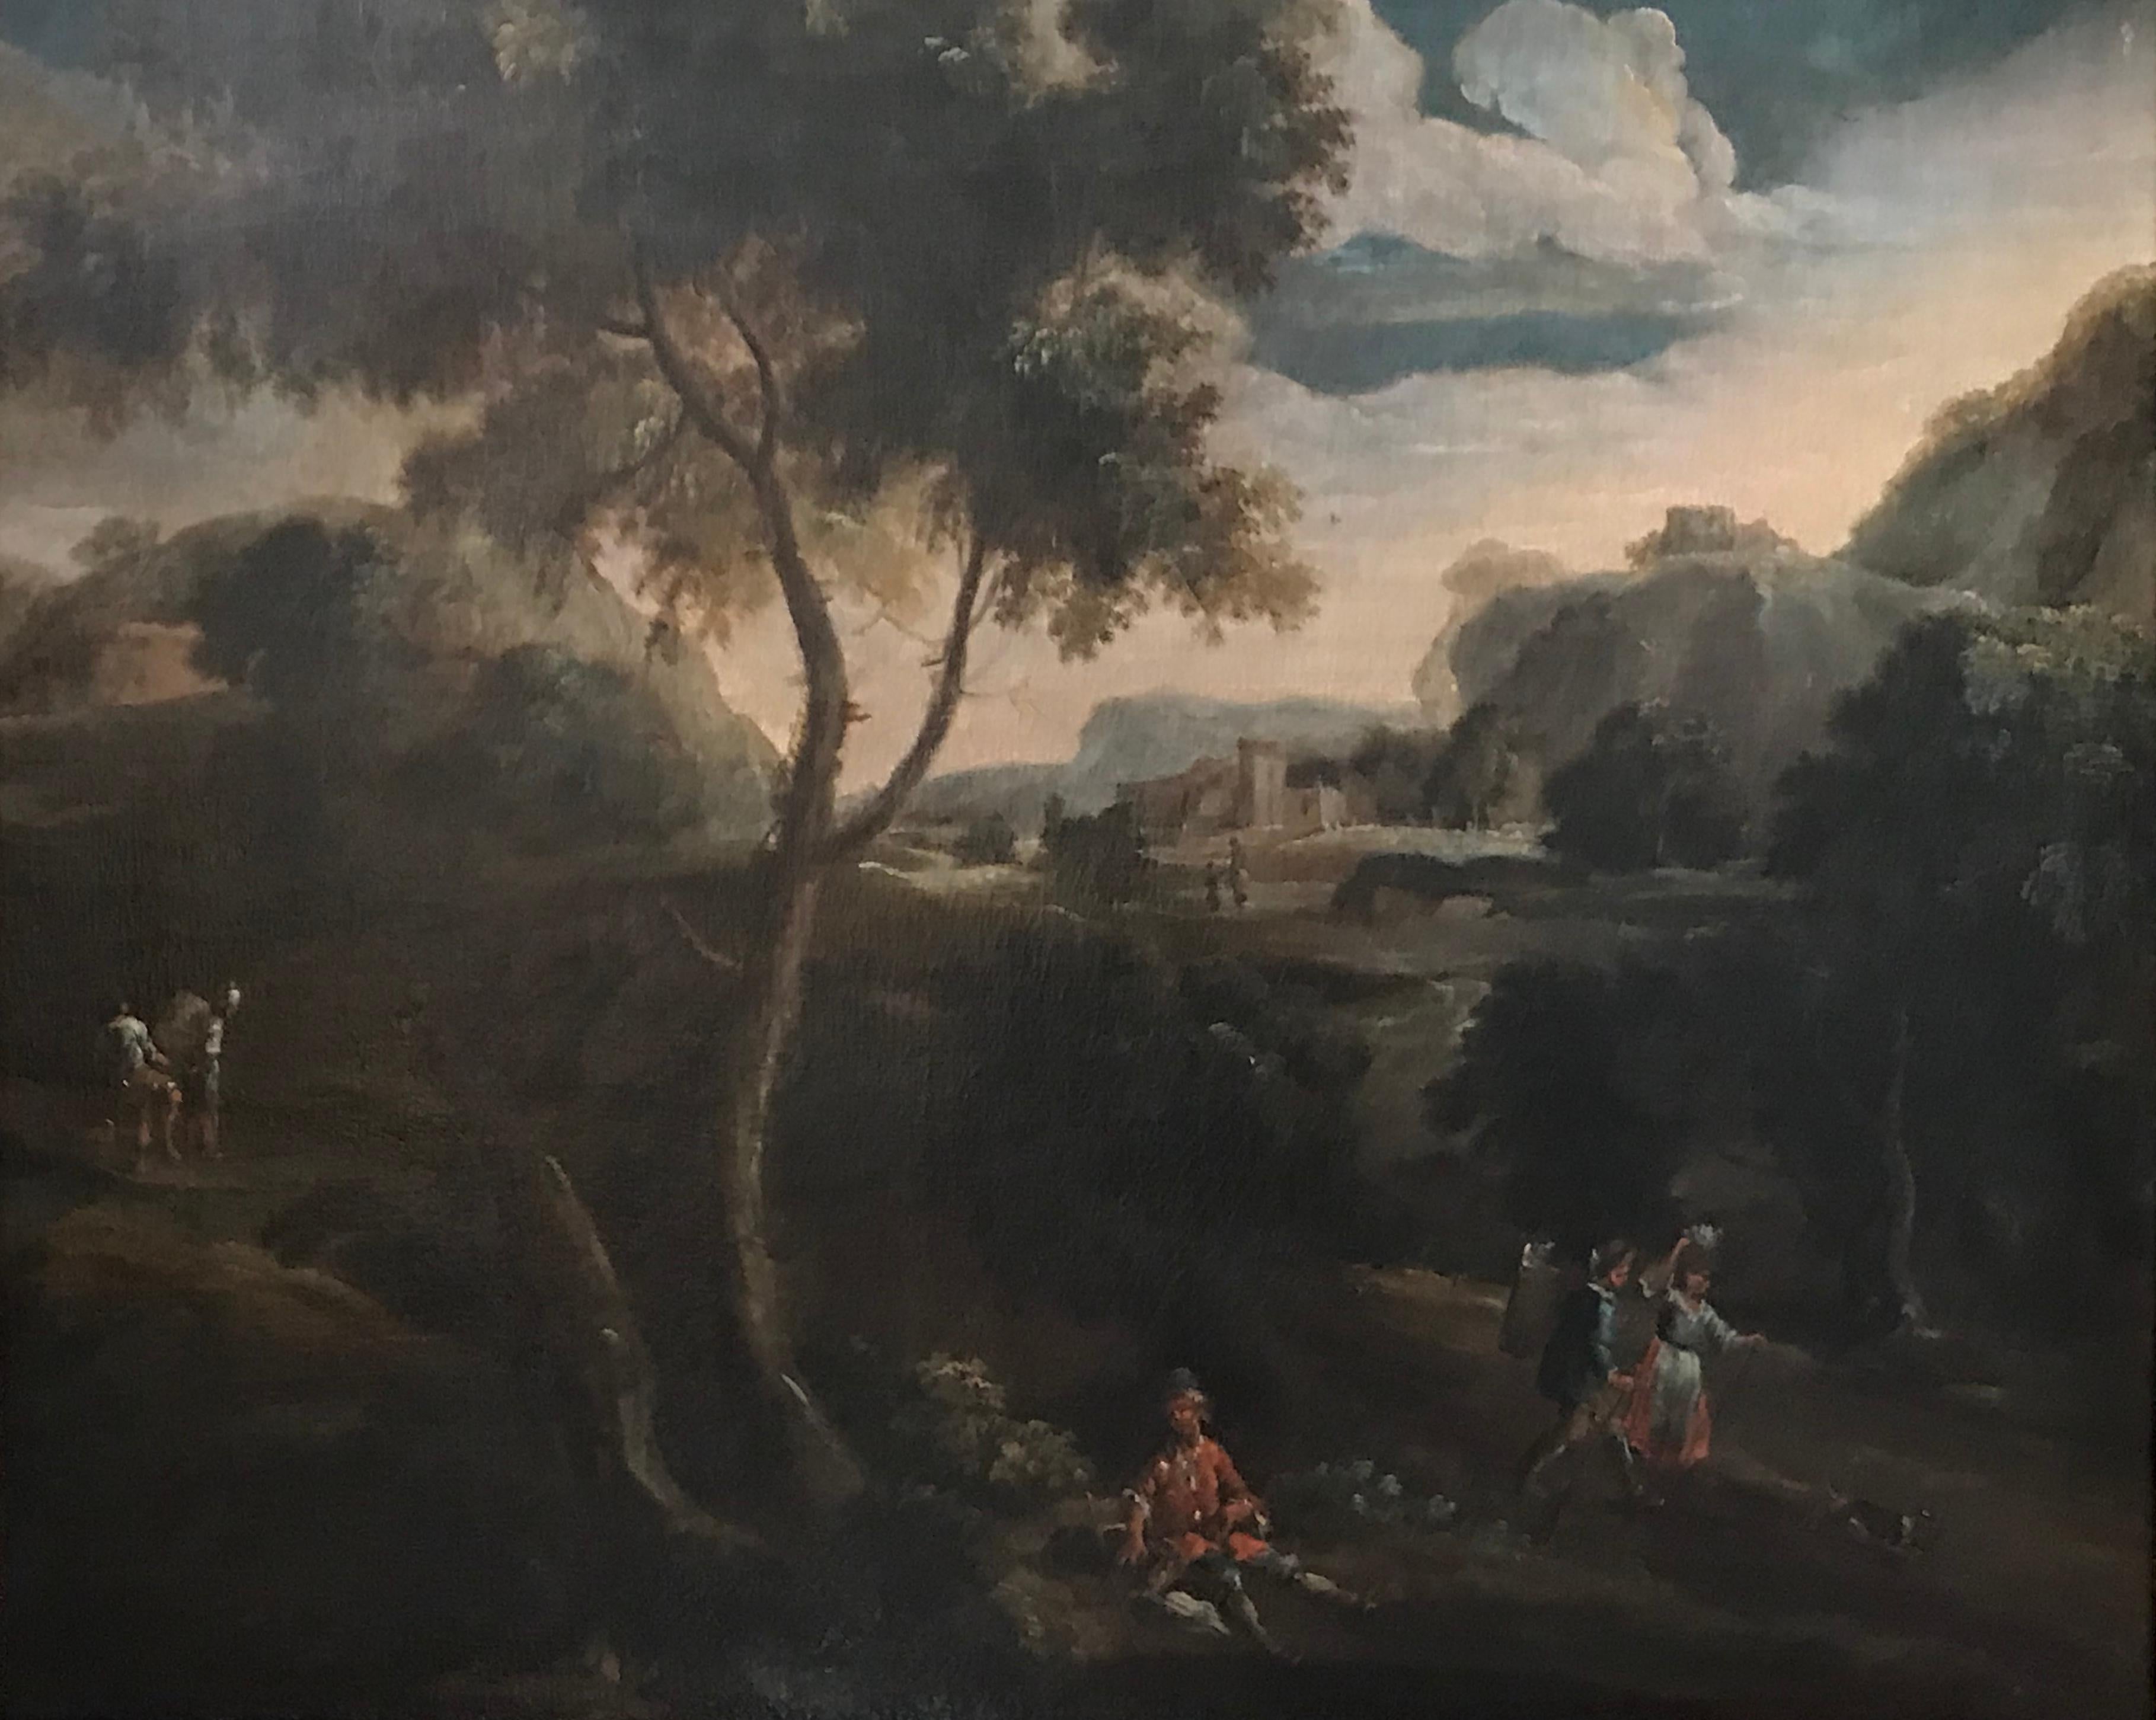 Unknown Landscape Painting - Arcadian Landscape with Figures, circa 1740. Large Old Master oil painting